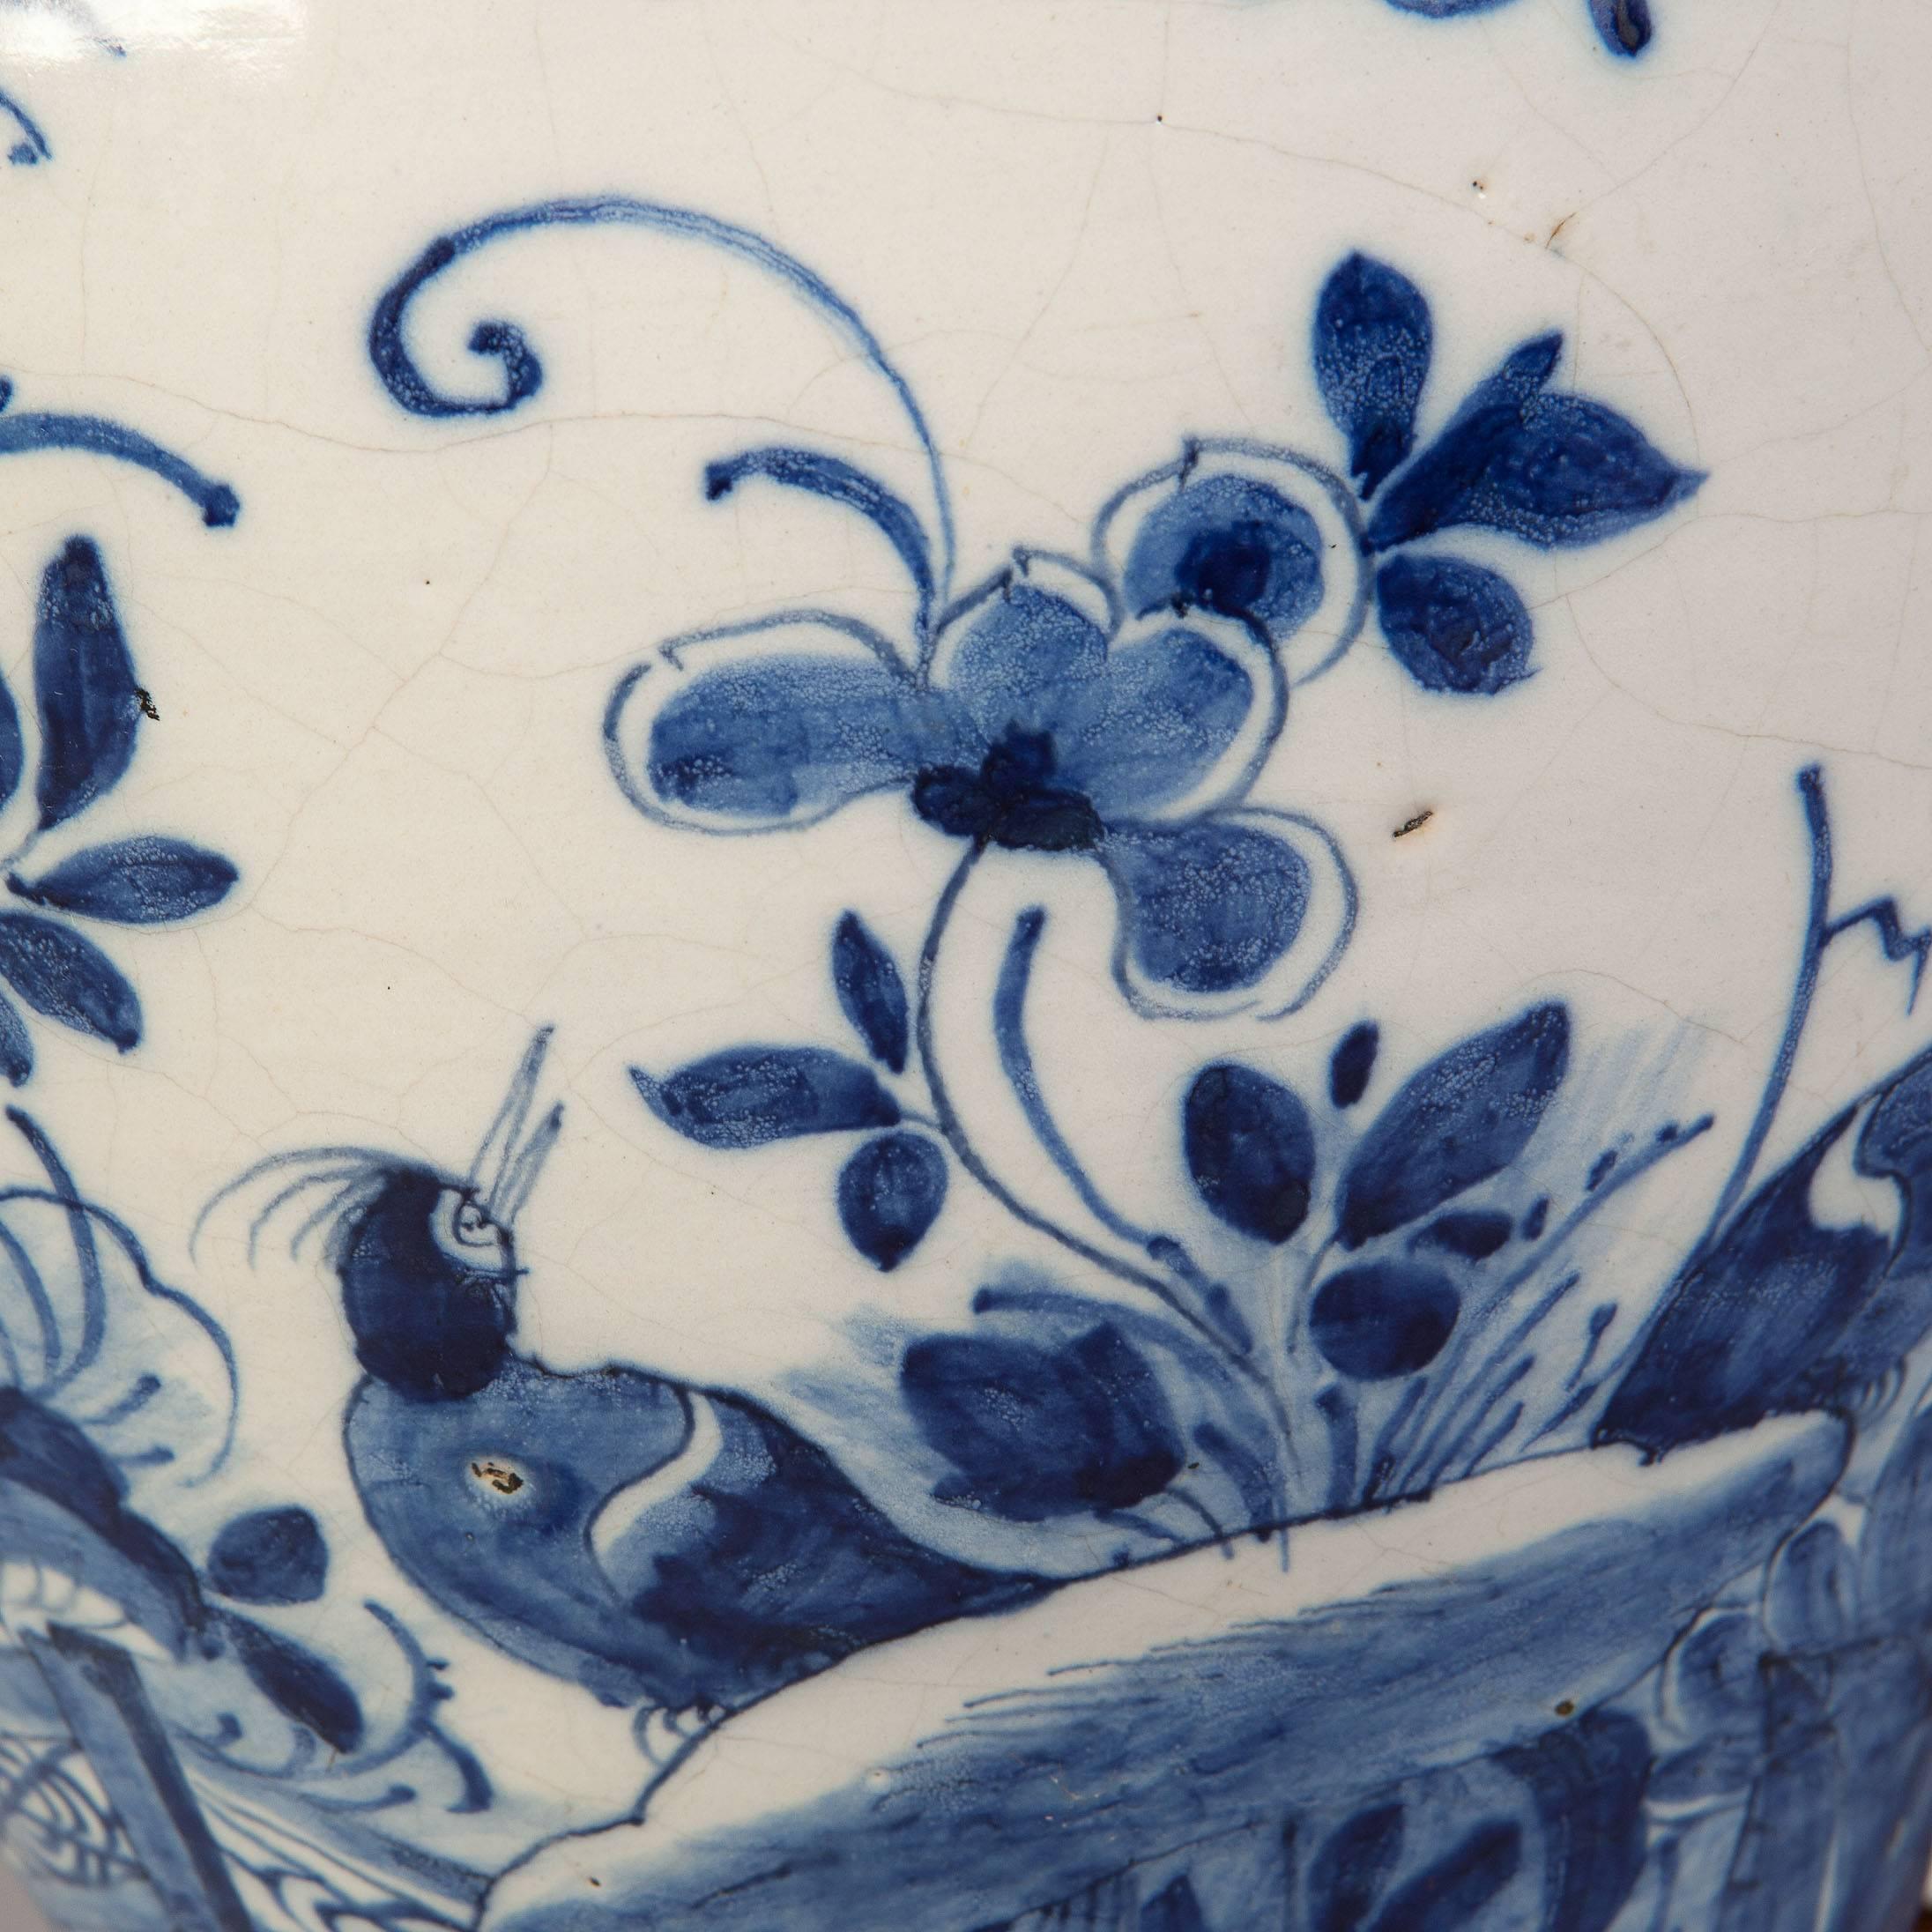 Netherlands, 1750.

A very decorative mid-18th century delft pottery vase, decorated with birds and foliage in cobalt blue on a white ground. Now mounted as a lamp. 

Height 13 inches to the top of the vase.
Diameter of vase 8 1/2